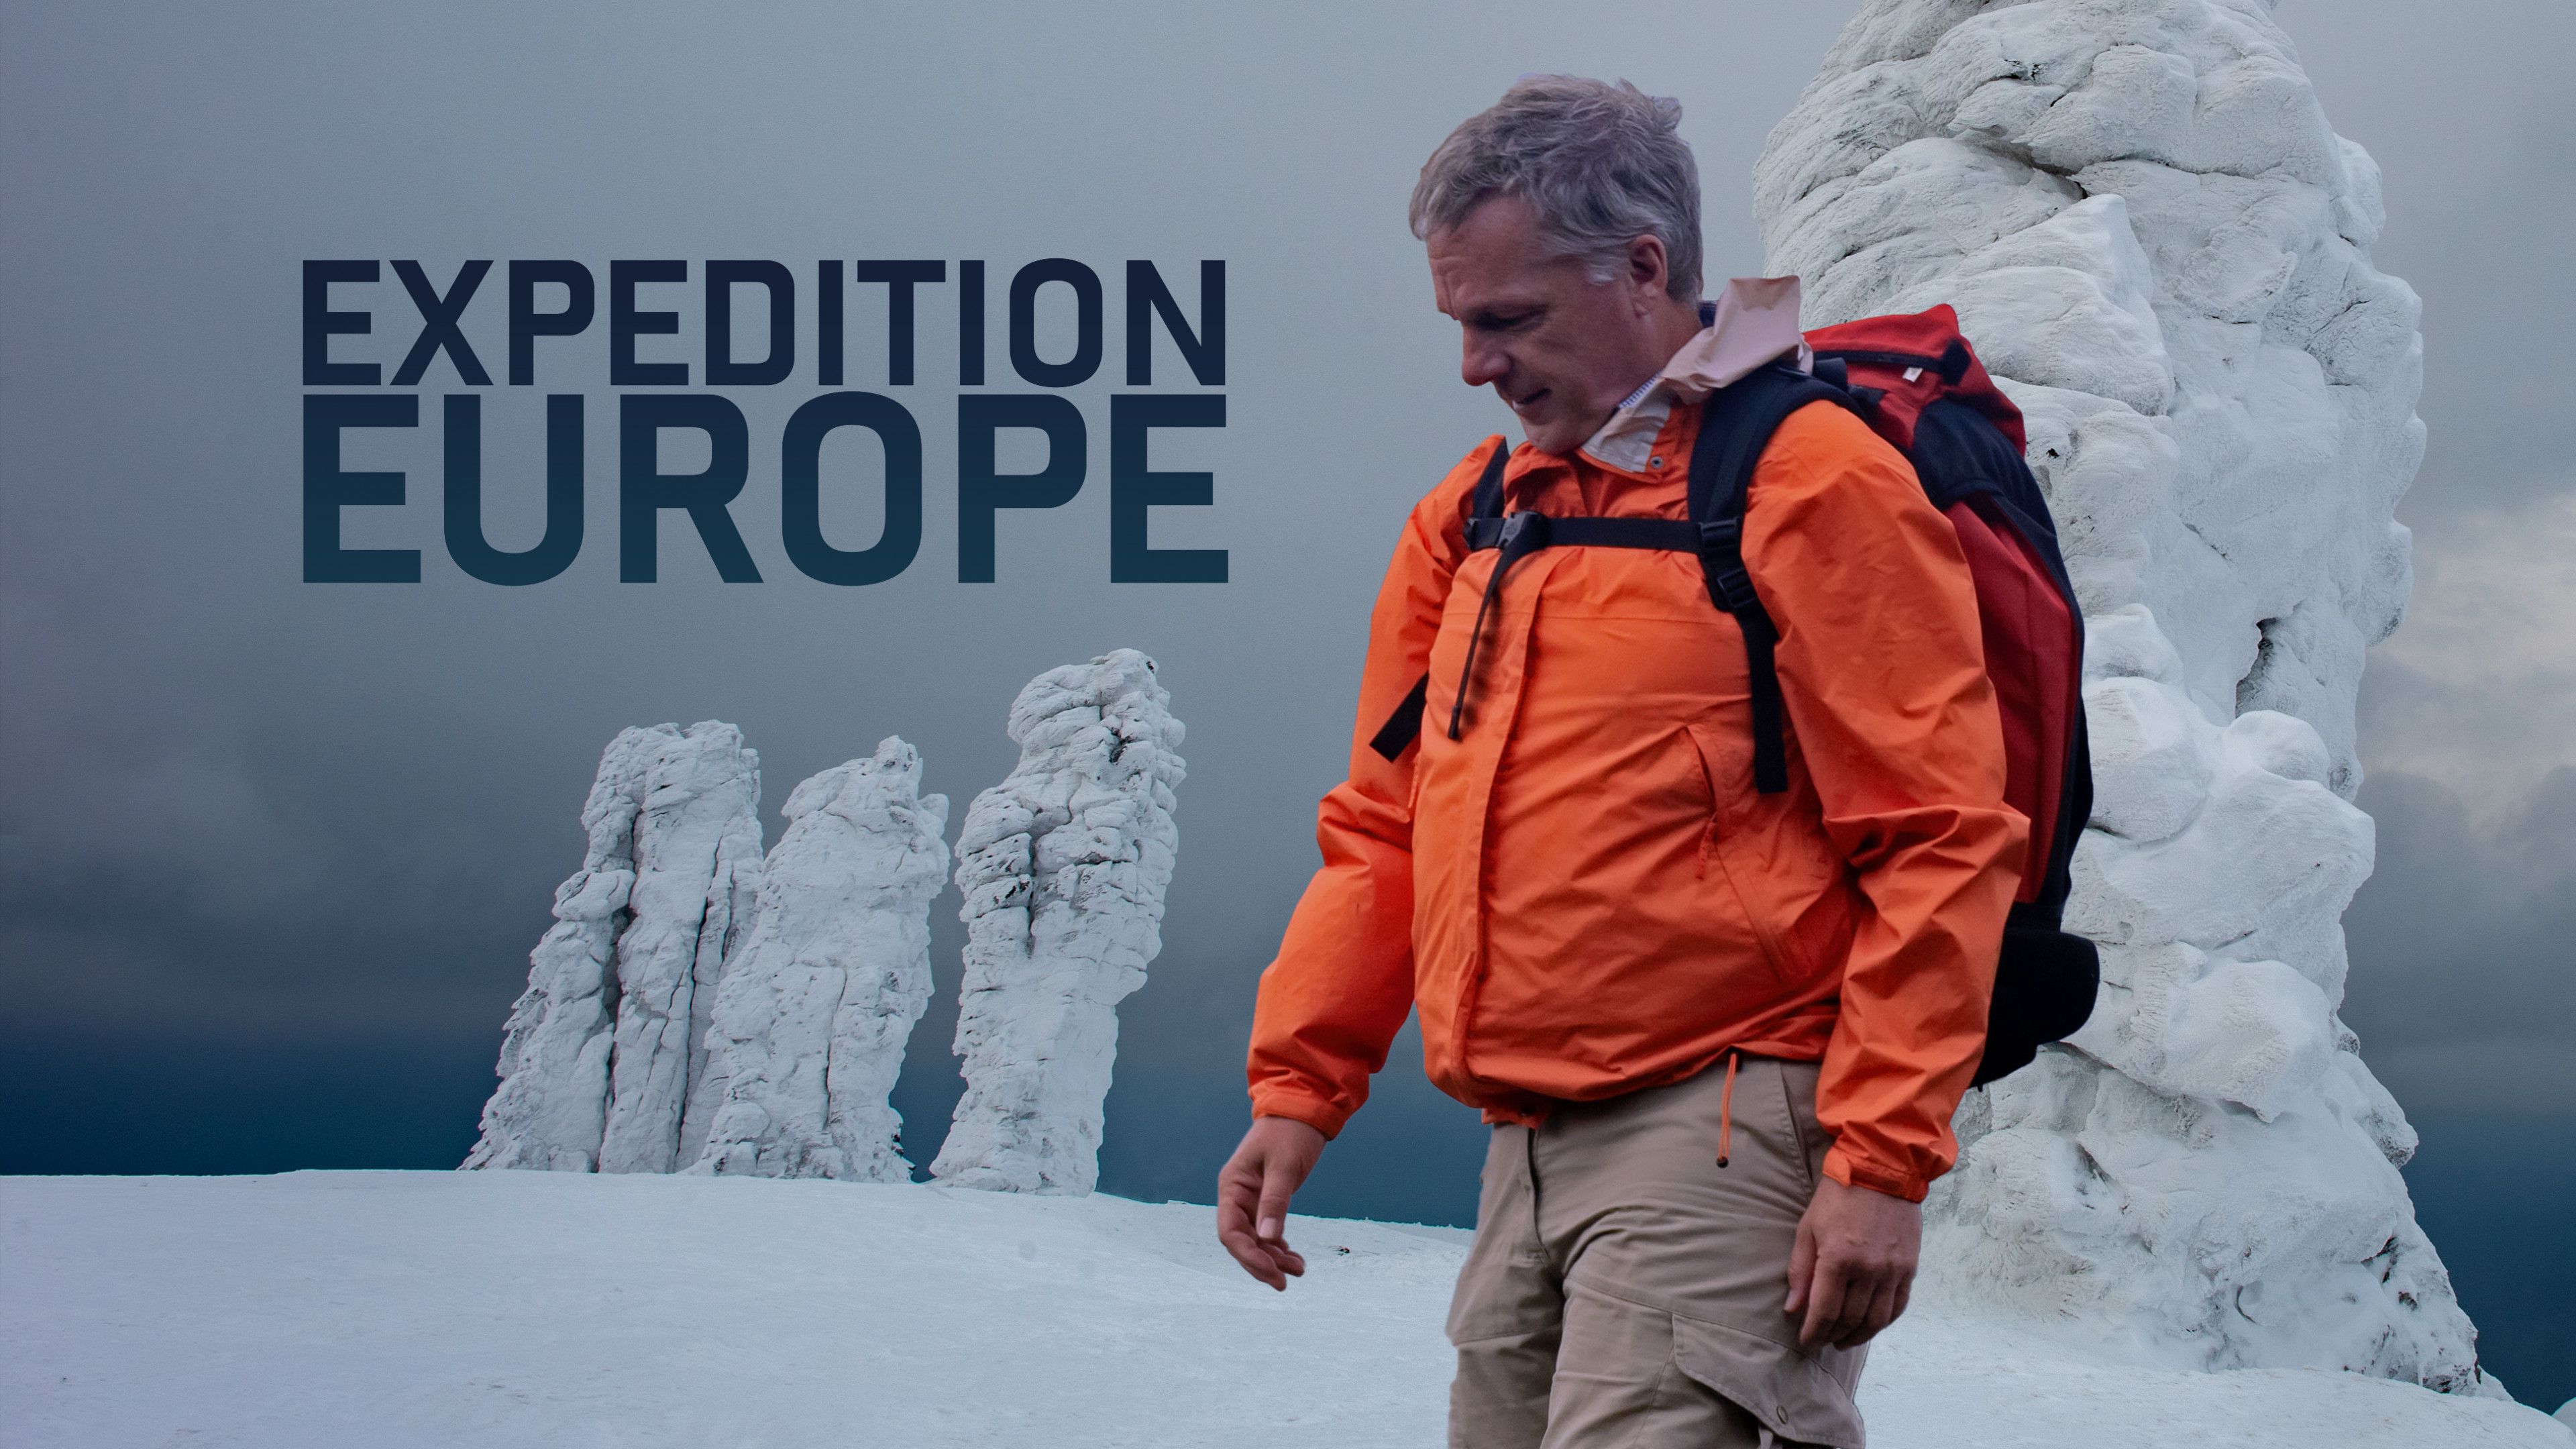 Expedition Europe